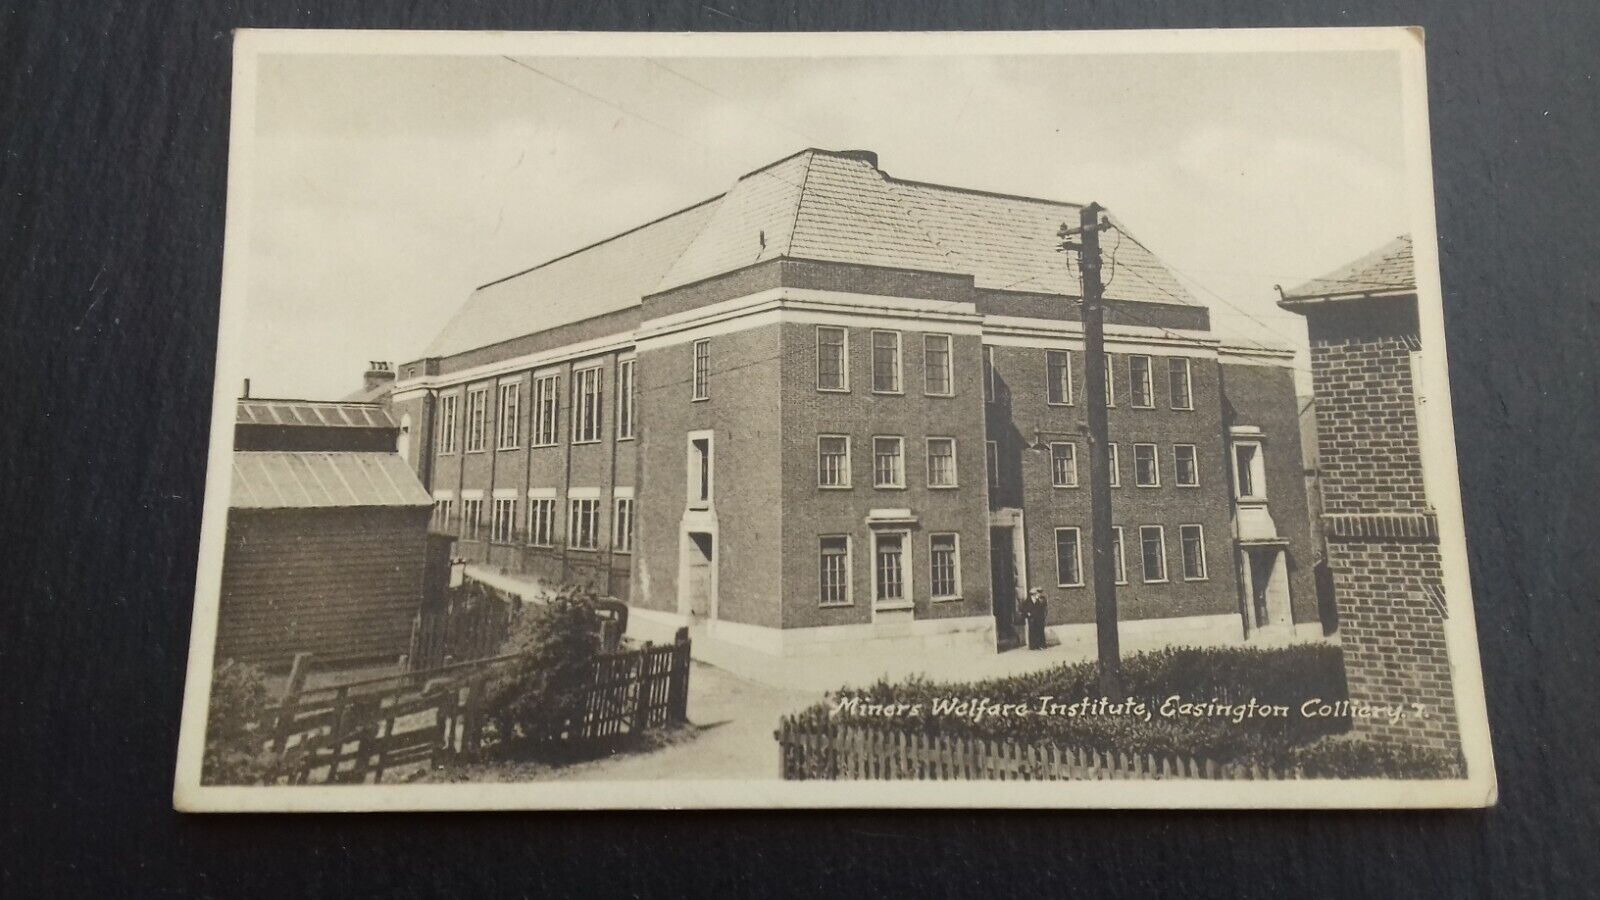 House Clearance - Service Miners Welfare Institute Easington Colliery M & L National series